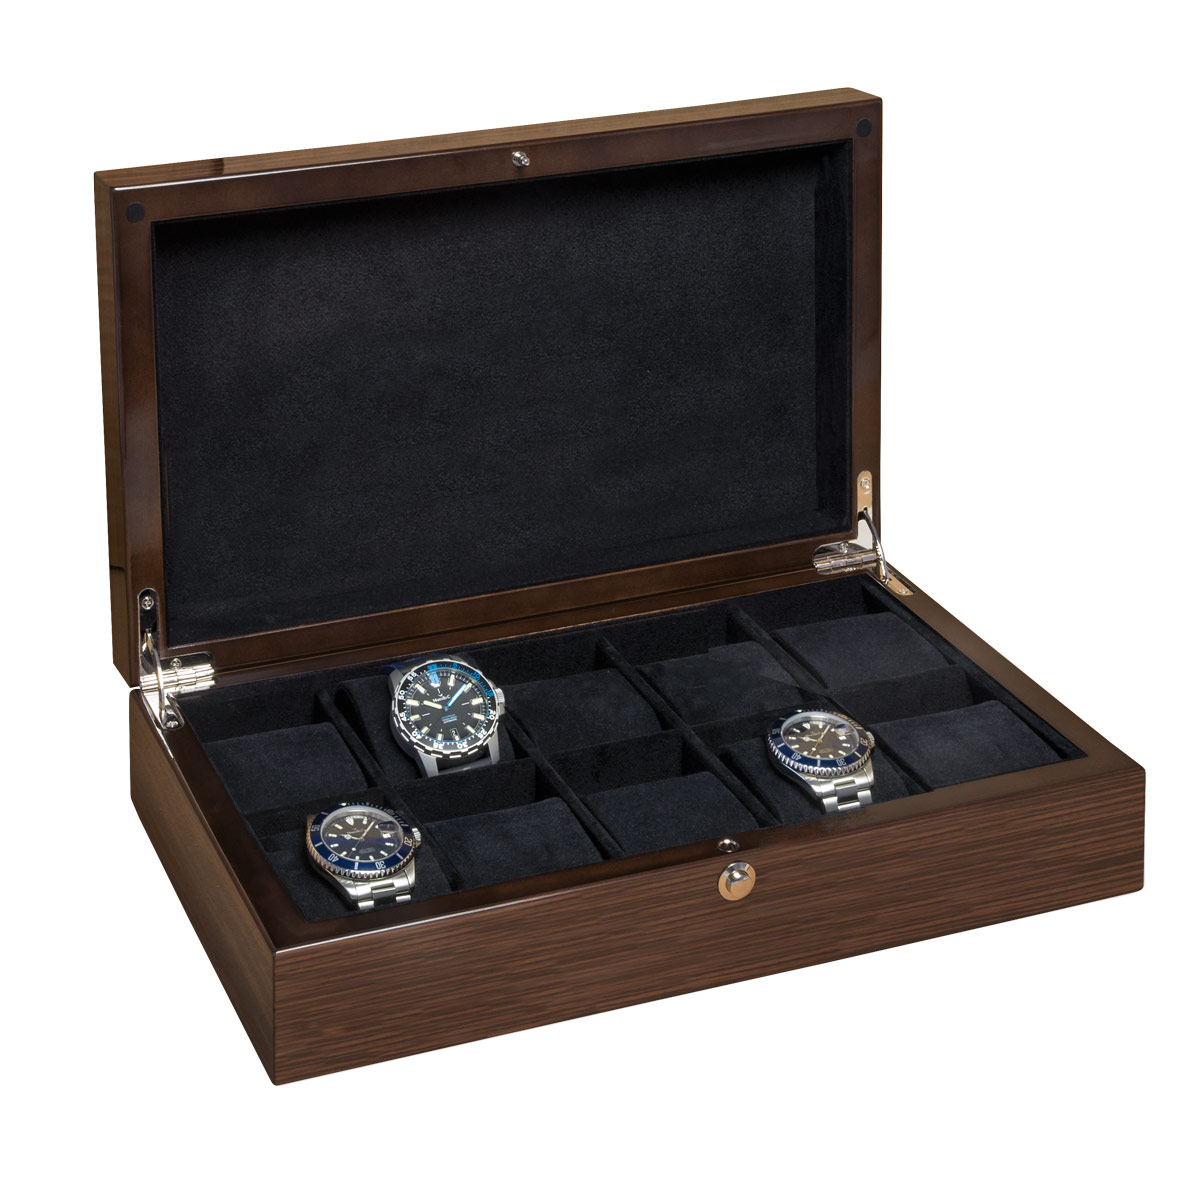 Beco watch collector's box for 10 watches, walnut, matte, black lining